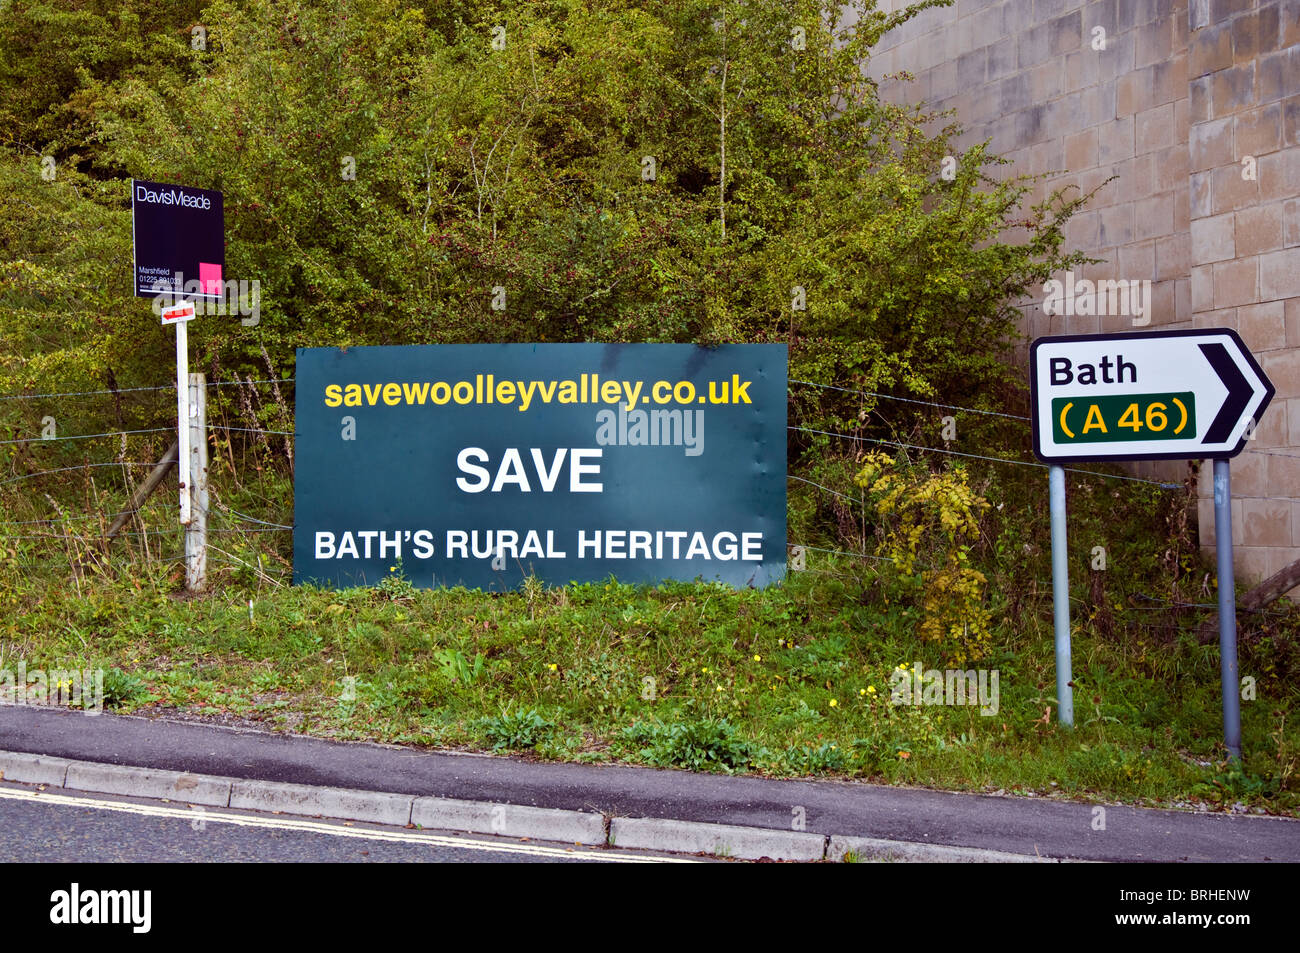 Sign advertising protest group Savewoolleyvalley near Swainswick Bath Stock Photo